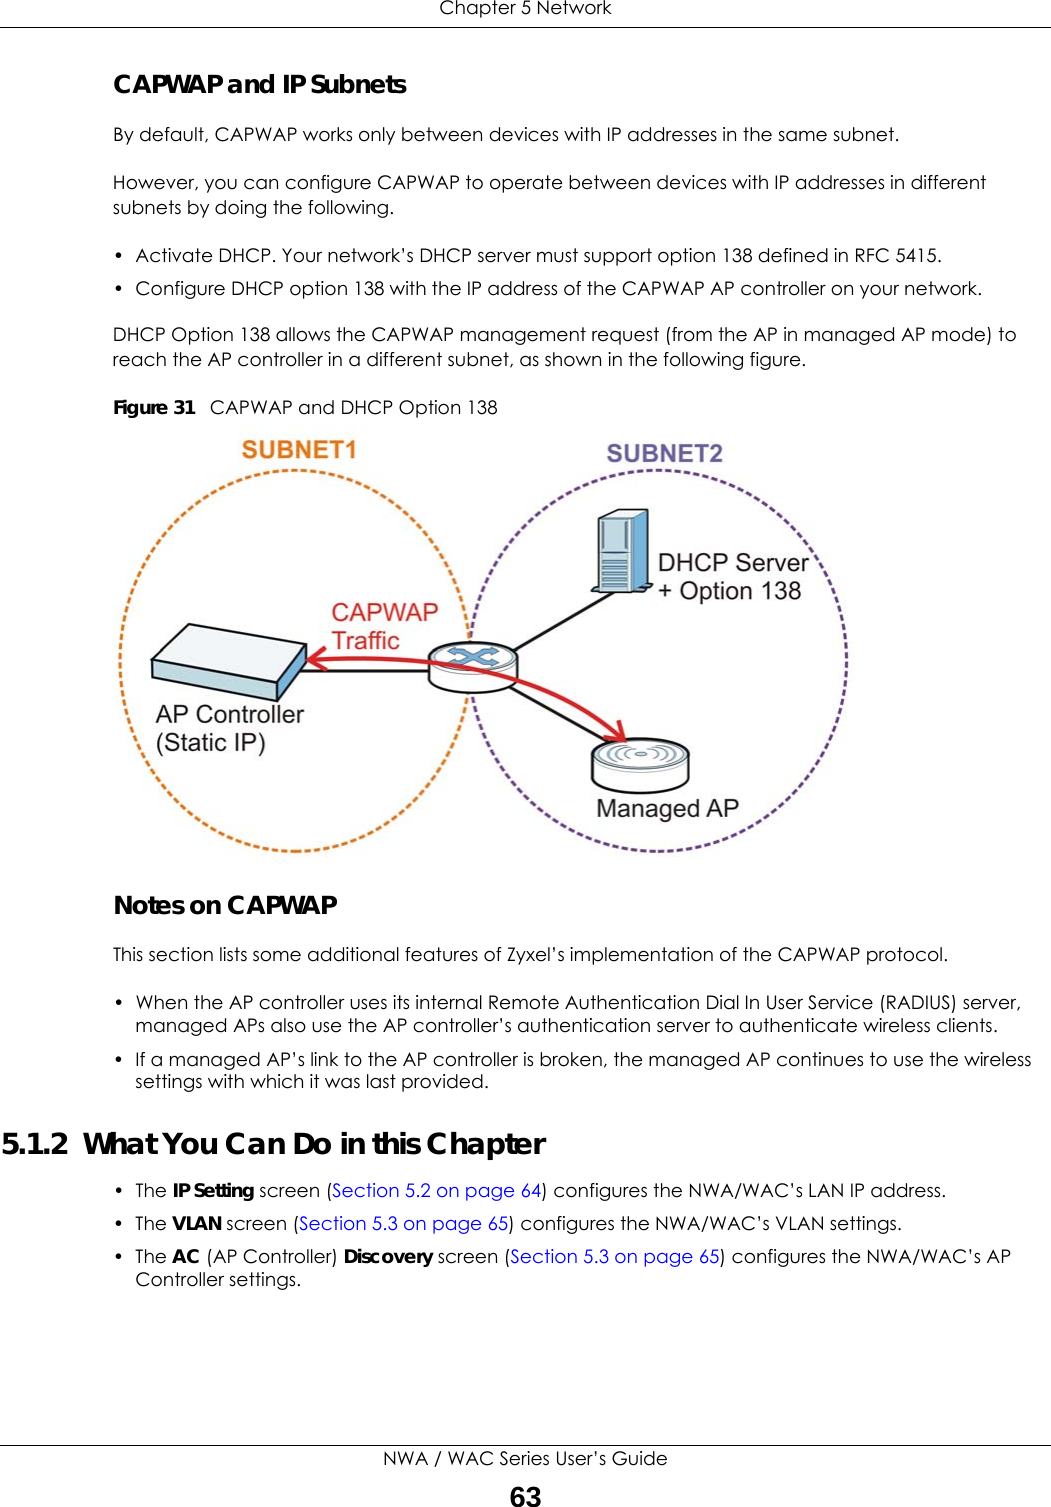 Chapter 5 NetworkNWA / WAC Series User’s Guide63CAPWAP and IP SubnetsBy default, CAPWAP works only between devices with IP addresses in the same subnet. However, you can configure CAPWAP to operate between devices with IP addresses in different subnets by doing the following.• Activate DHCP. Your network’s DHCP server must support option 138 defined in RFC 5415.• Configure DHCP option 138 with the IP address of the CAPWAP AP controller on your network.DHCP Option 138 allows the CAPWAP management request (from the AP in managed AP mode) to reach the AP controller in a different subnet, as shown in the following figure.Figure 31   CAPWAP and DHCP Option 138 Notes on CAPWAPThis section lists some additional features of Zyxel’s implementation of the CAPWAP protocol.• When the AP controller uses its internal Remote Authentication Dial In User Service (RADIUS) server, managed APs also use the AP controller’s authentication server to authenticate wireless clients.• If a managed AP’s link to the AP controller is broken, the managed AP continues to use the wireless settings with which it was last provided.5.1.2  What You Can Do in this Chapter• The IP Setting screen (Section 5.2 on page 64) configures the NWA/WAC’s LAN IP address. • The VLAN screen (Section 5.3 on page 65) configures the NWA/WAC’s VLAN settings. • The AC (AP Controller) Discovery screen (Section 5.3 on page 65) configures the NWA/WAC’s AP Controller settings.